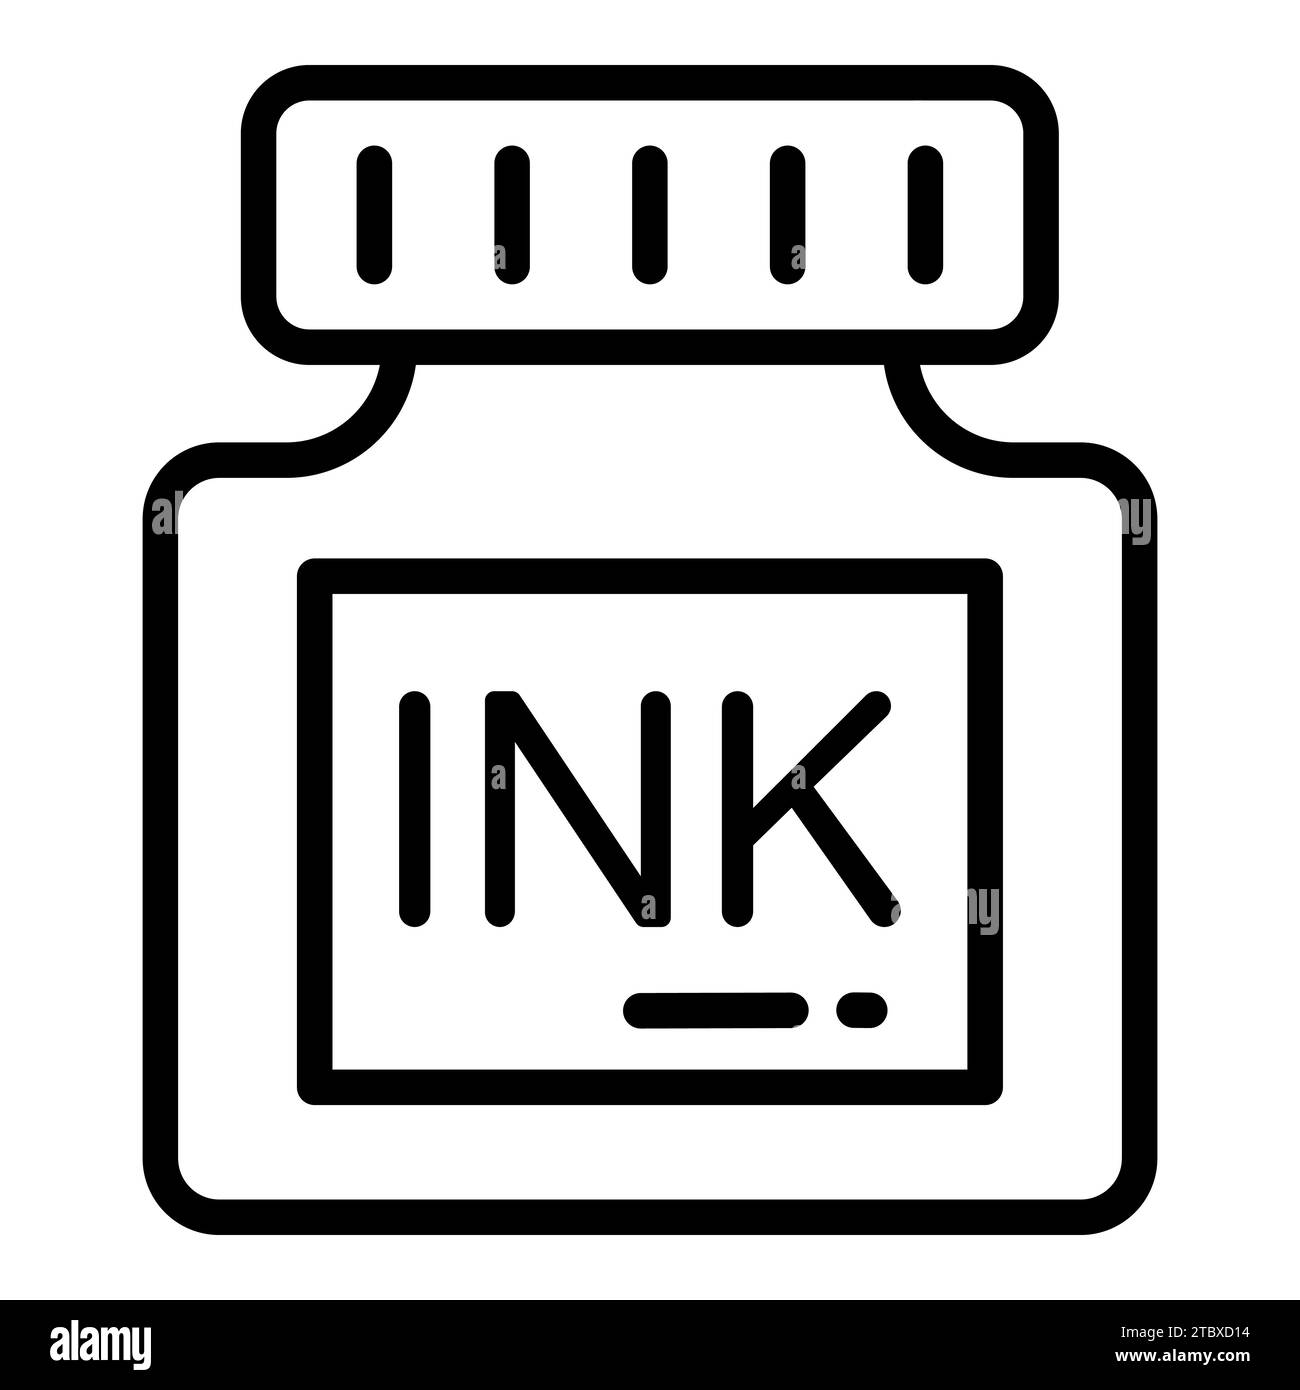 inkpot vector line icon, school and education icon Stock Vector